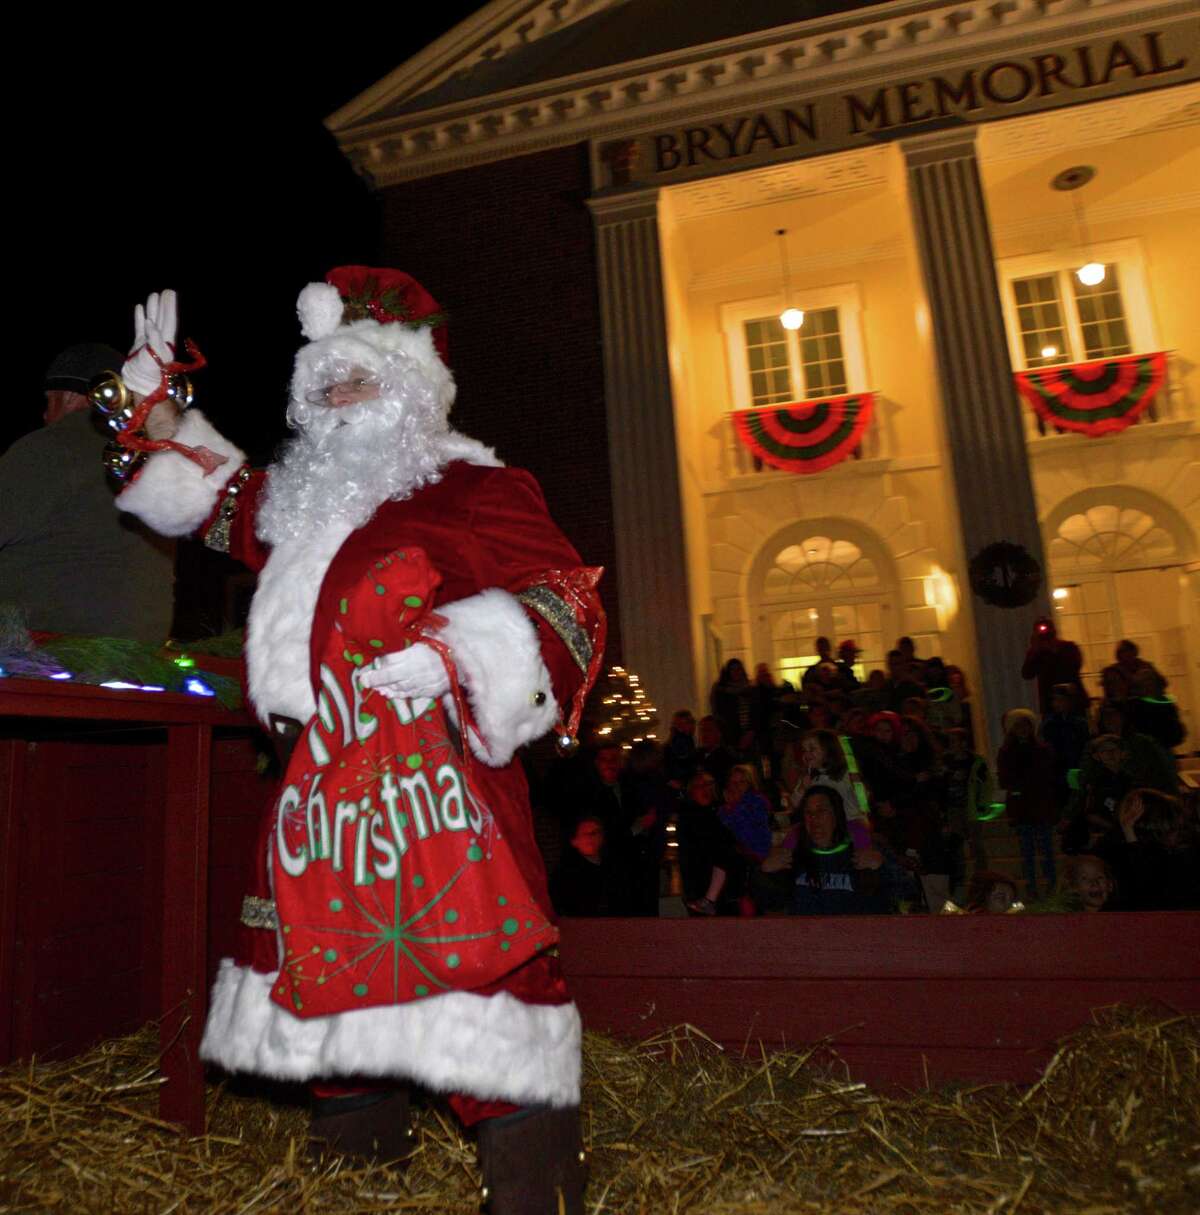 Santa arrives in a horse-drawn hay wagon for Washington's "Holiday in the Depot", on Friday night, December 11, 2015, in Washington, Conn.